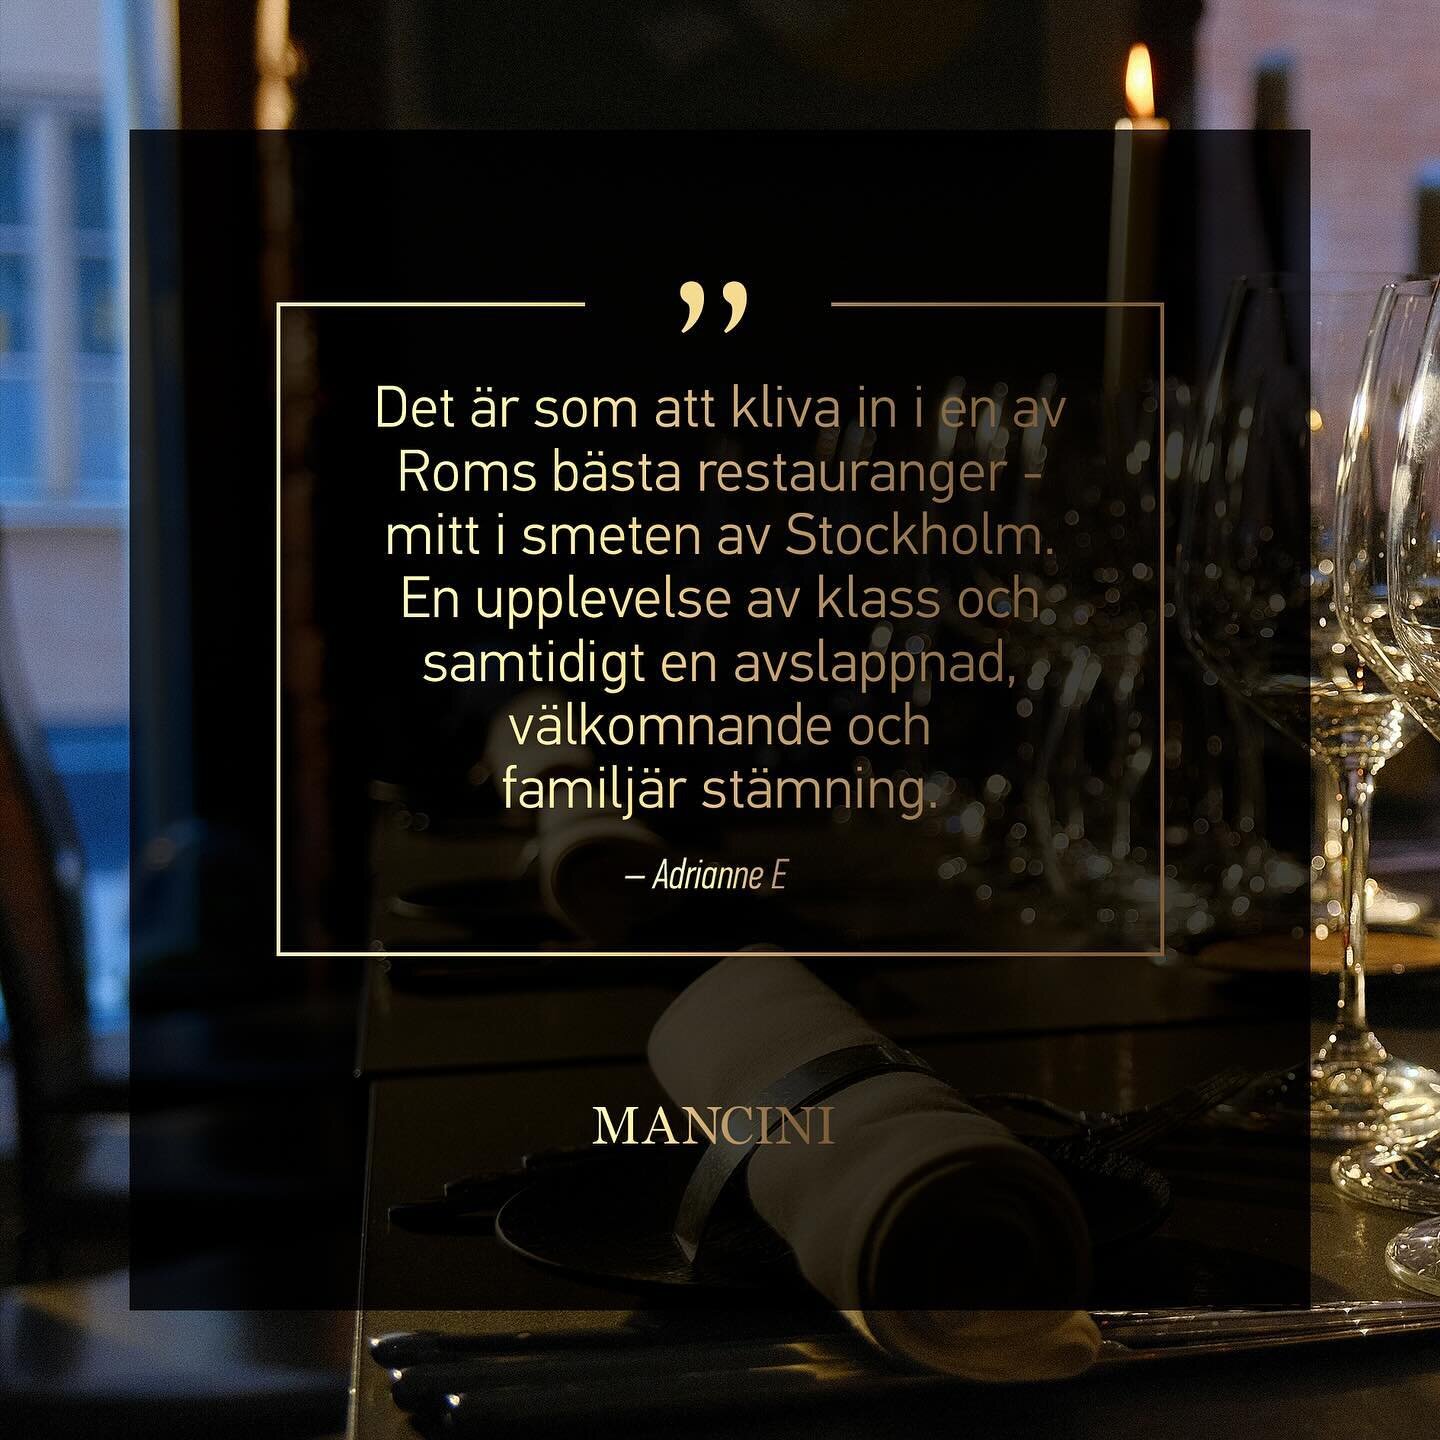 &ldquo;It&rsquo;s like walking into one of the best restaurants in Rome - but in the heart of Stockholm. An experience of pure class combined with a casual, welcoming and homely atmosphere.&rdquo; ✨

Benvenuti!

#Mancini #instarestaurant #italianfood